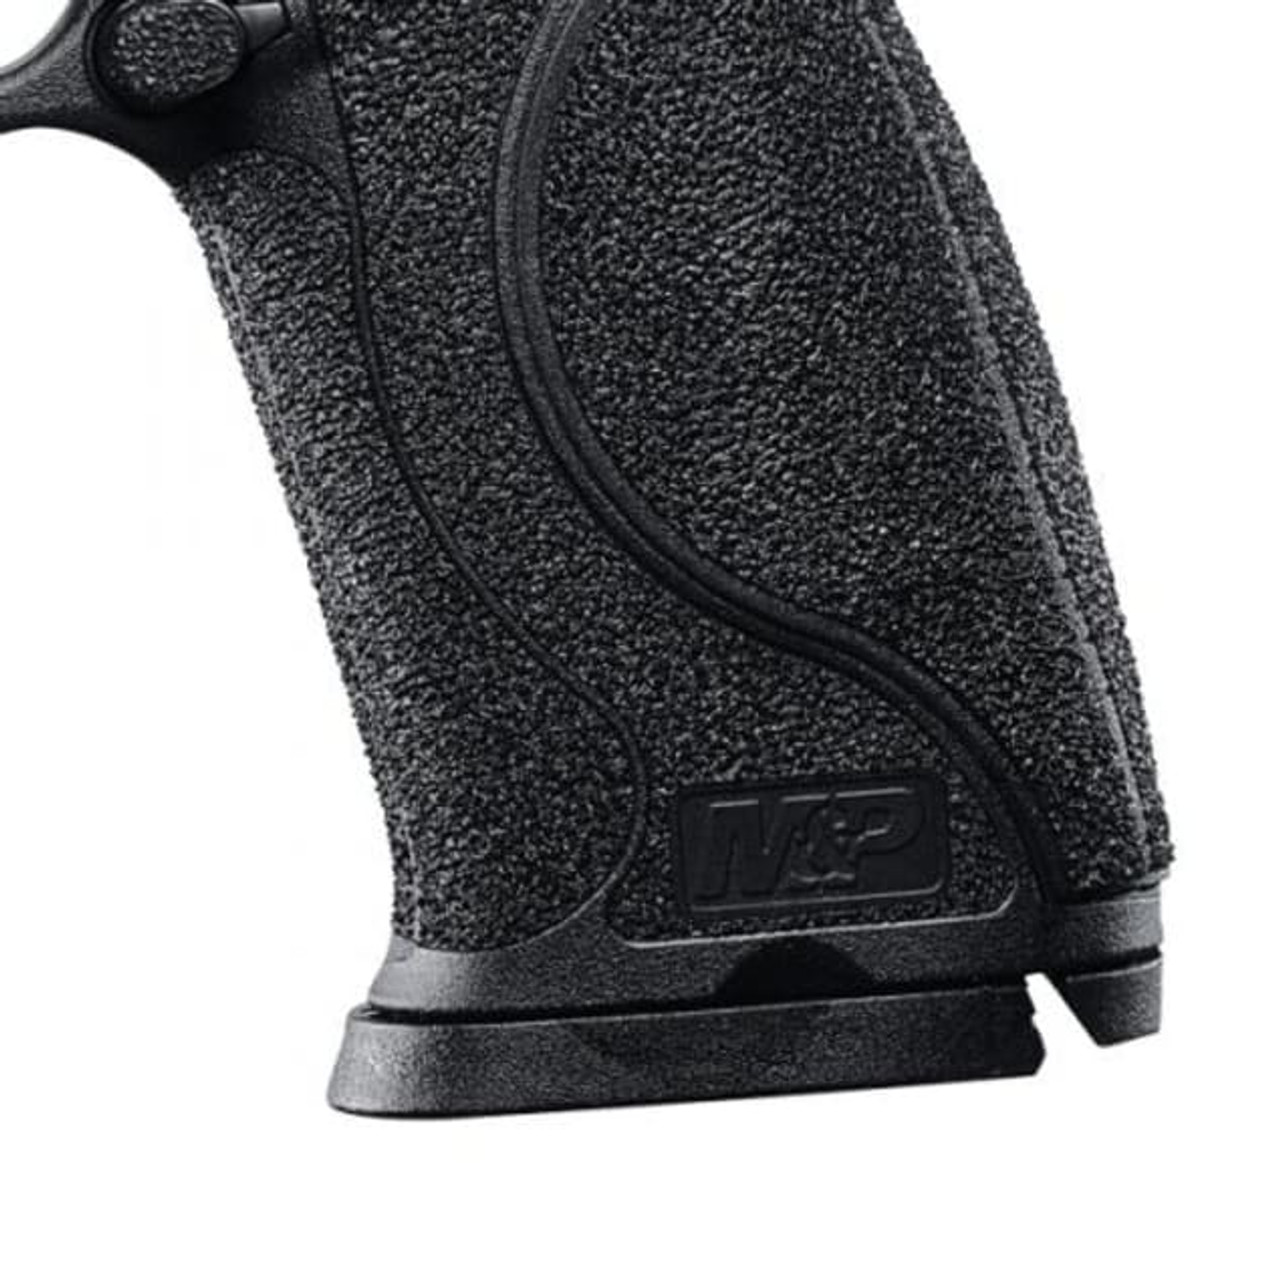 SMITH & WESSON M&P M2.0 9MM 4.25'' 10-RD PISTOL